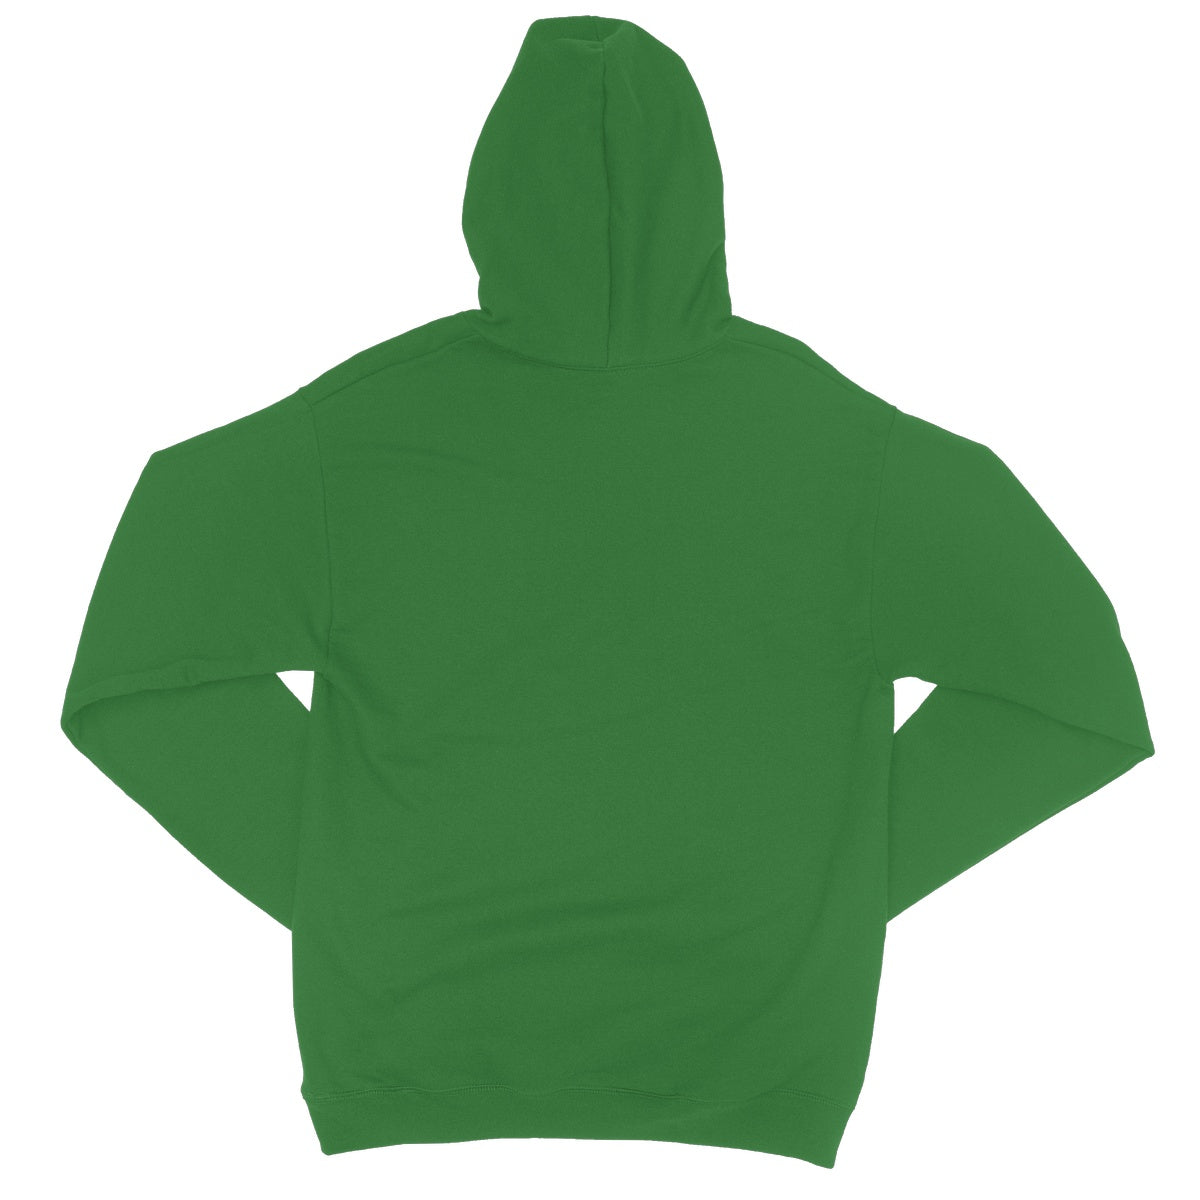 Celtic 4 sided knot Hoodie